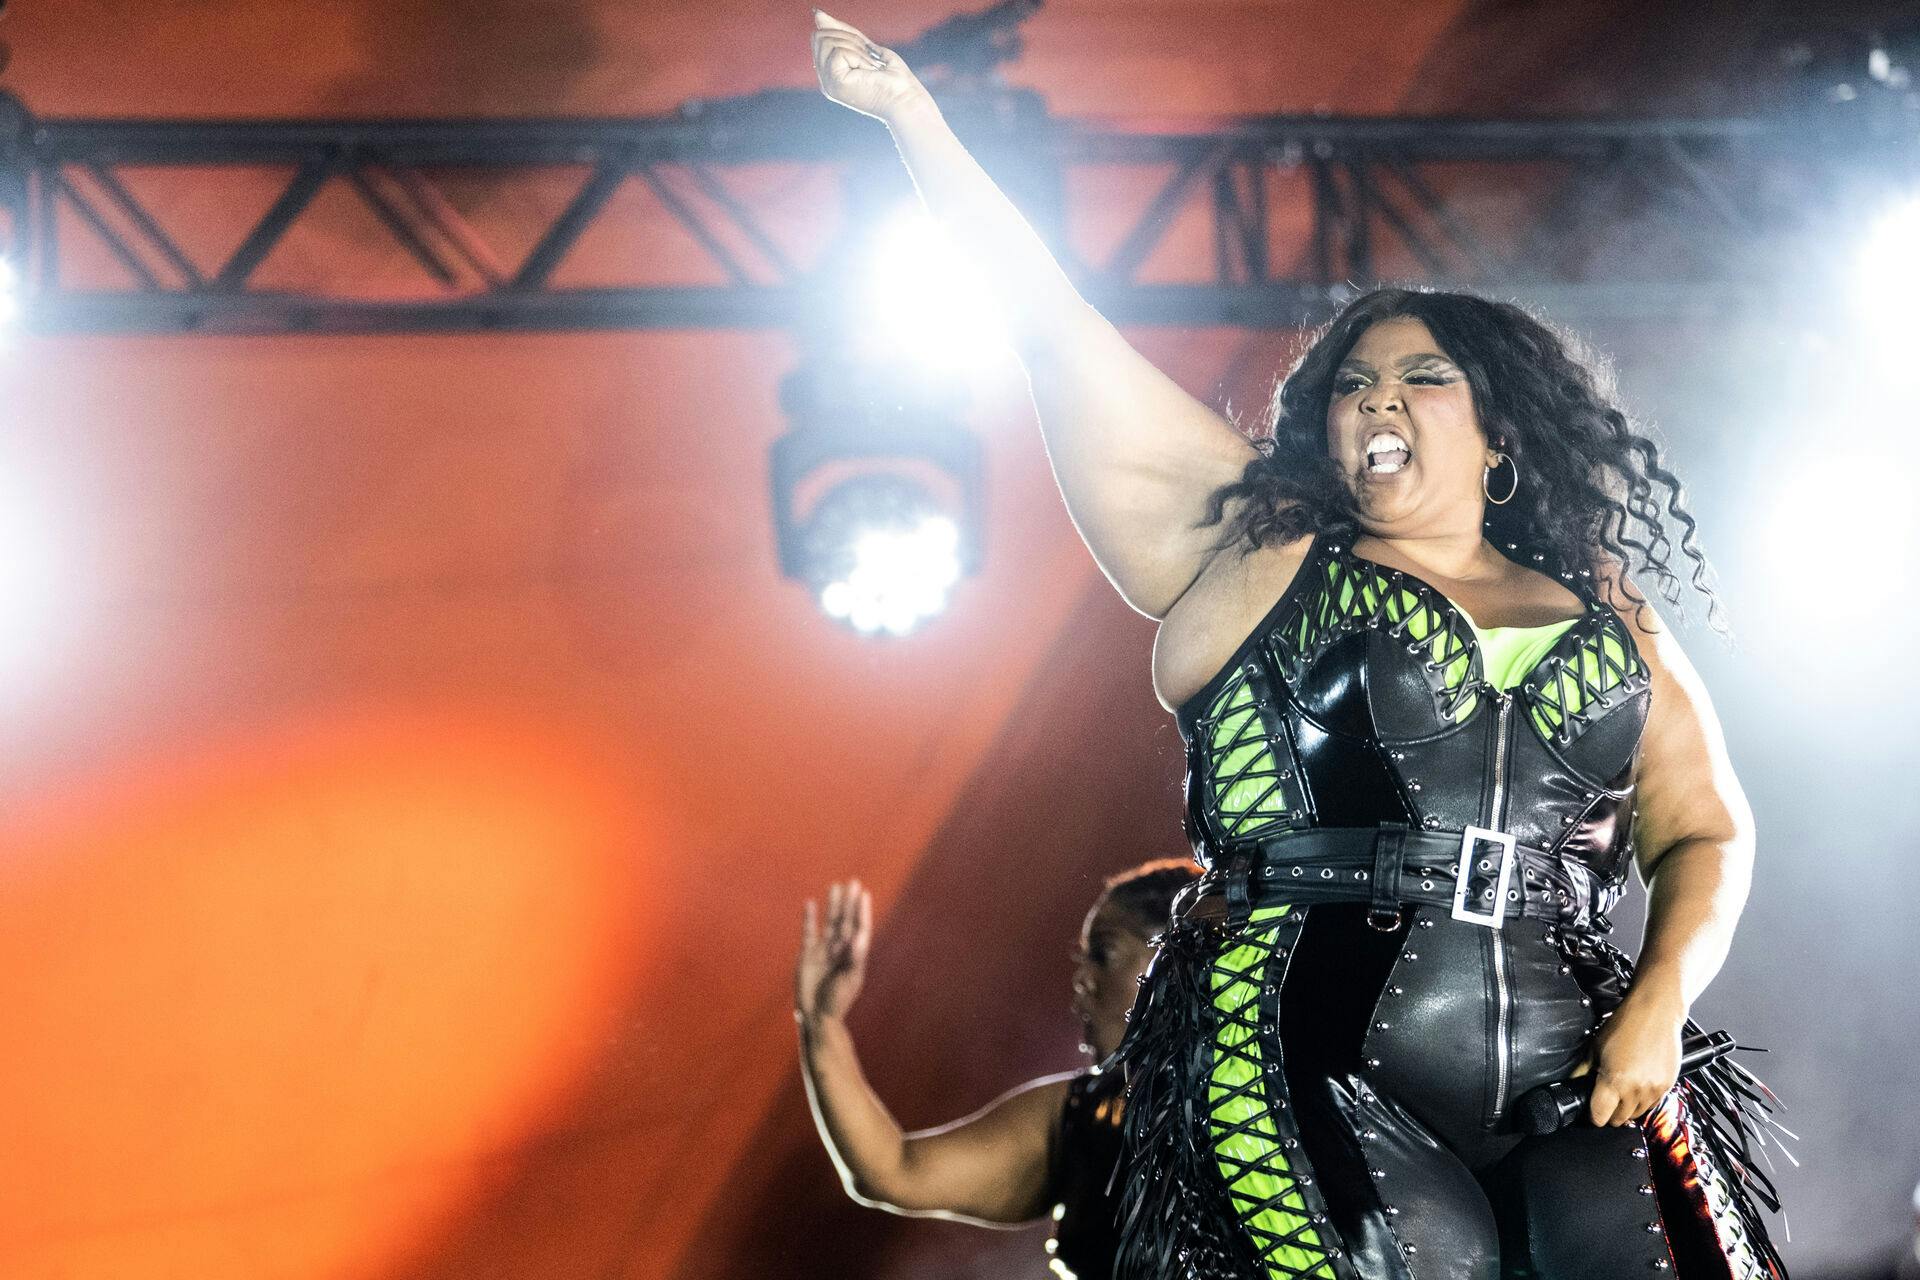 Lizzo plays at Orange Stage at the Roskilde Festival on Saturday July 1. 2023. (Photo: Helle Arensbak/Ritzau Scanpix)